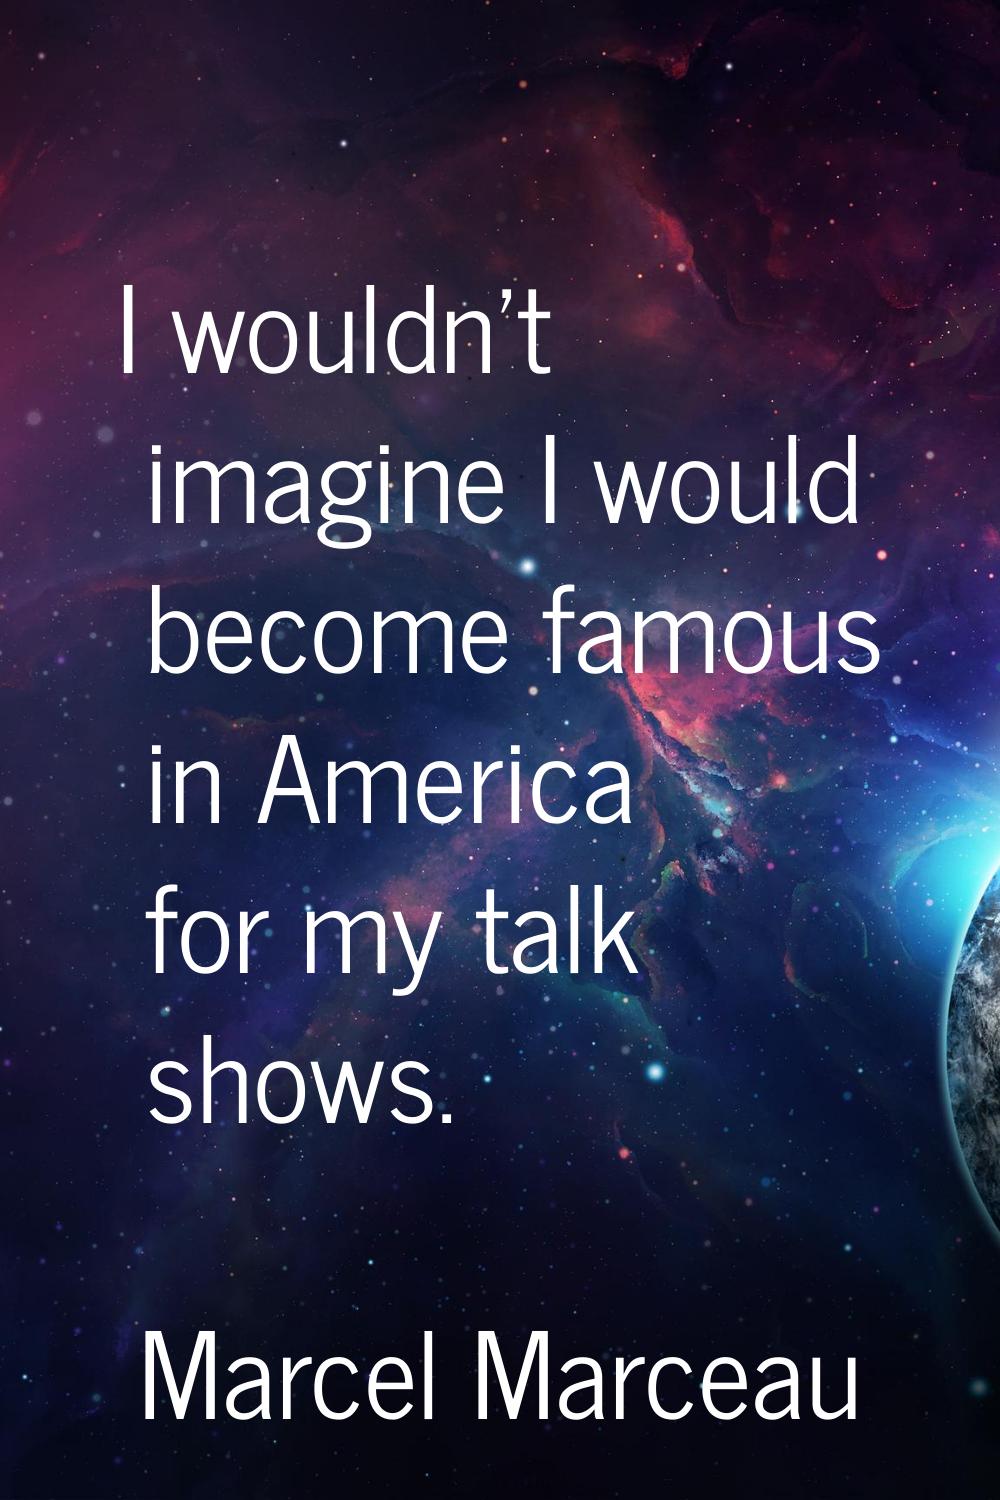 I wouldn't imagine I would become famous in America for my talk shows.